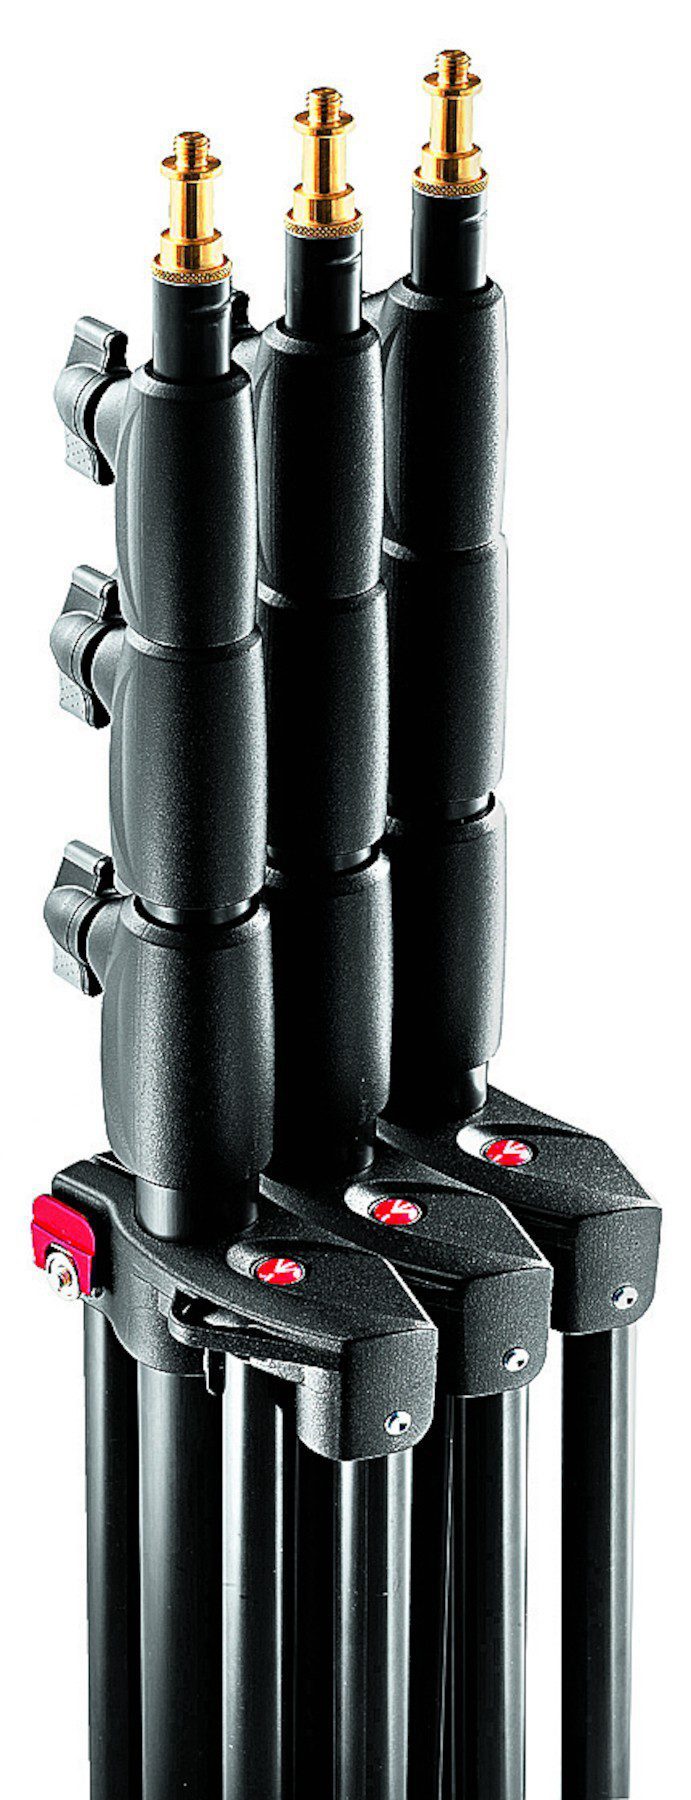 Manfrotto 1004BAC